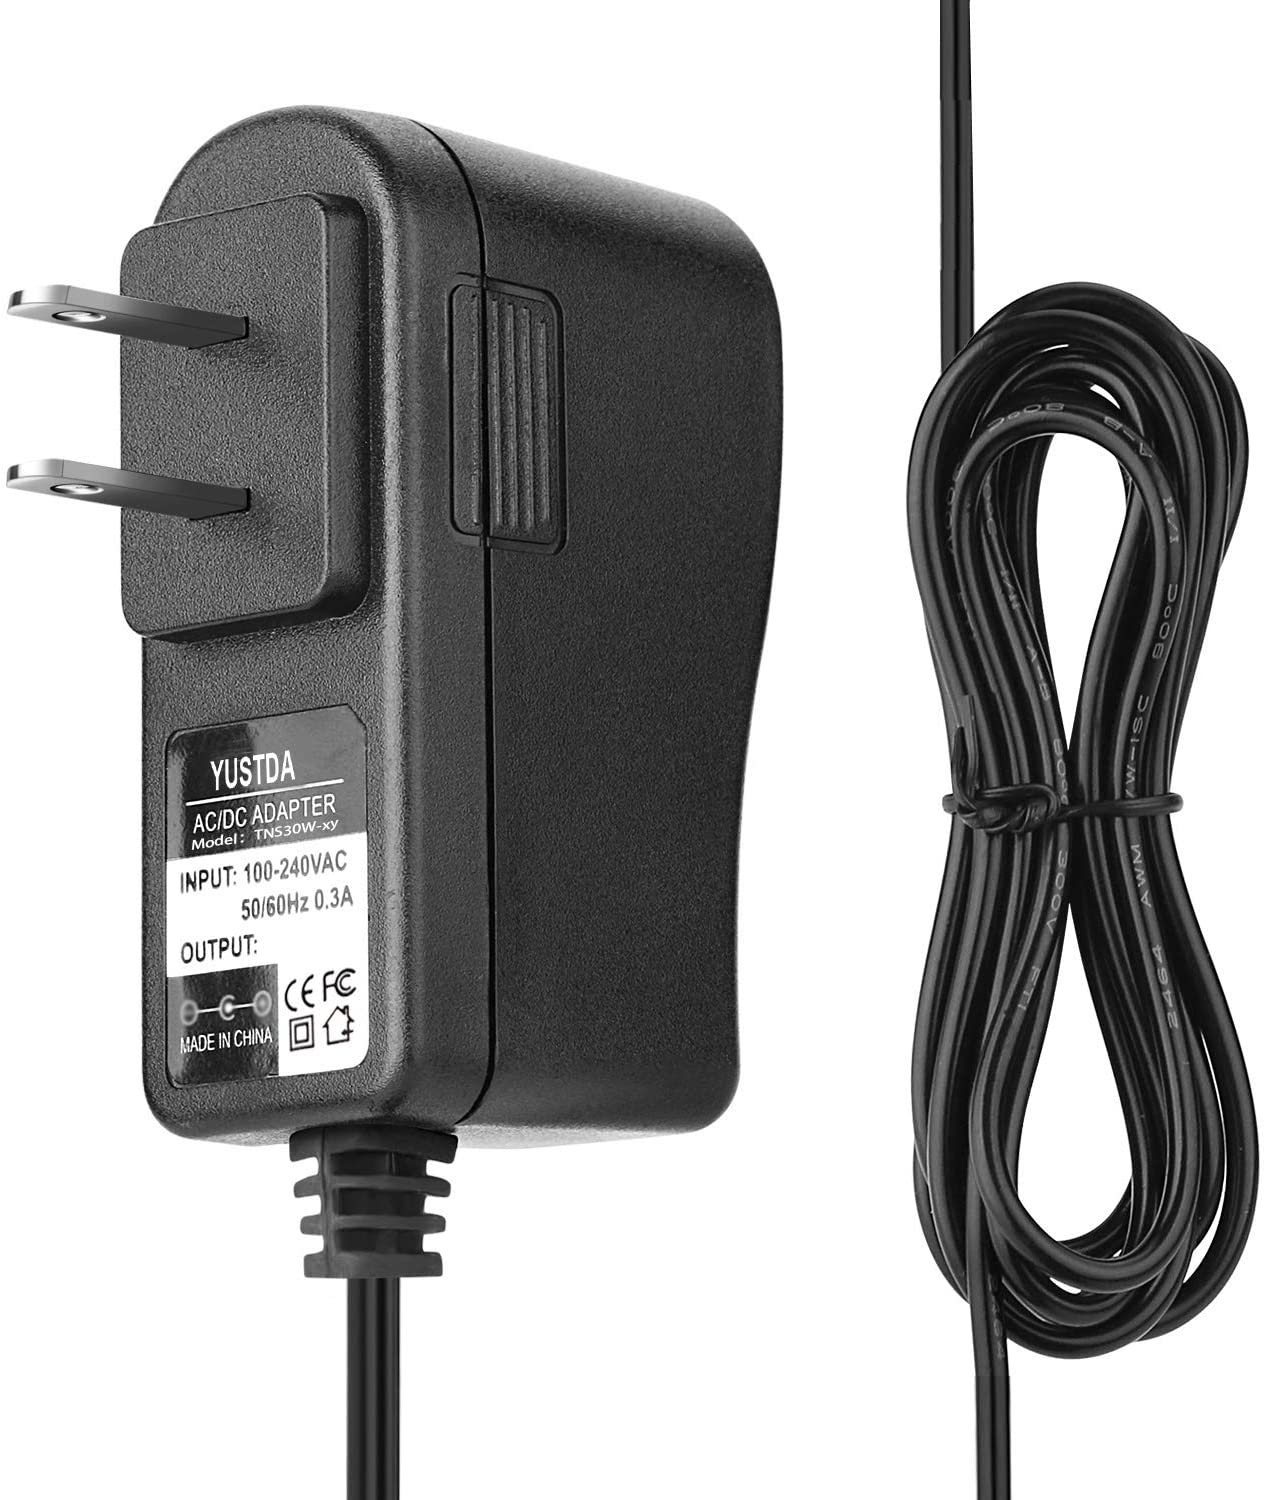 Yustda 12V AC/DC Adapter Replacement for Roland ACO-120T Model: A41210T Boss Electric Piano Keyboard Class 2 Transformer 12VDC DC12V 12.0V 12 Volts Power Supply Cord Home Wall Charger PSU - image 1 of 4